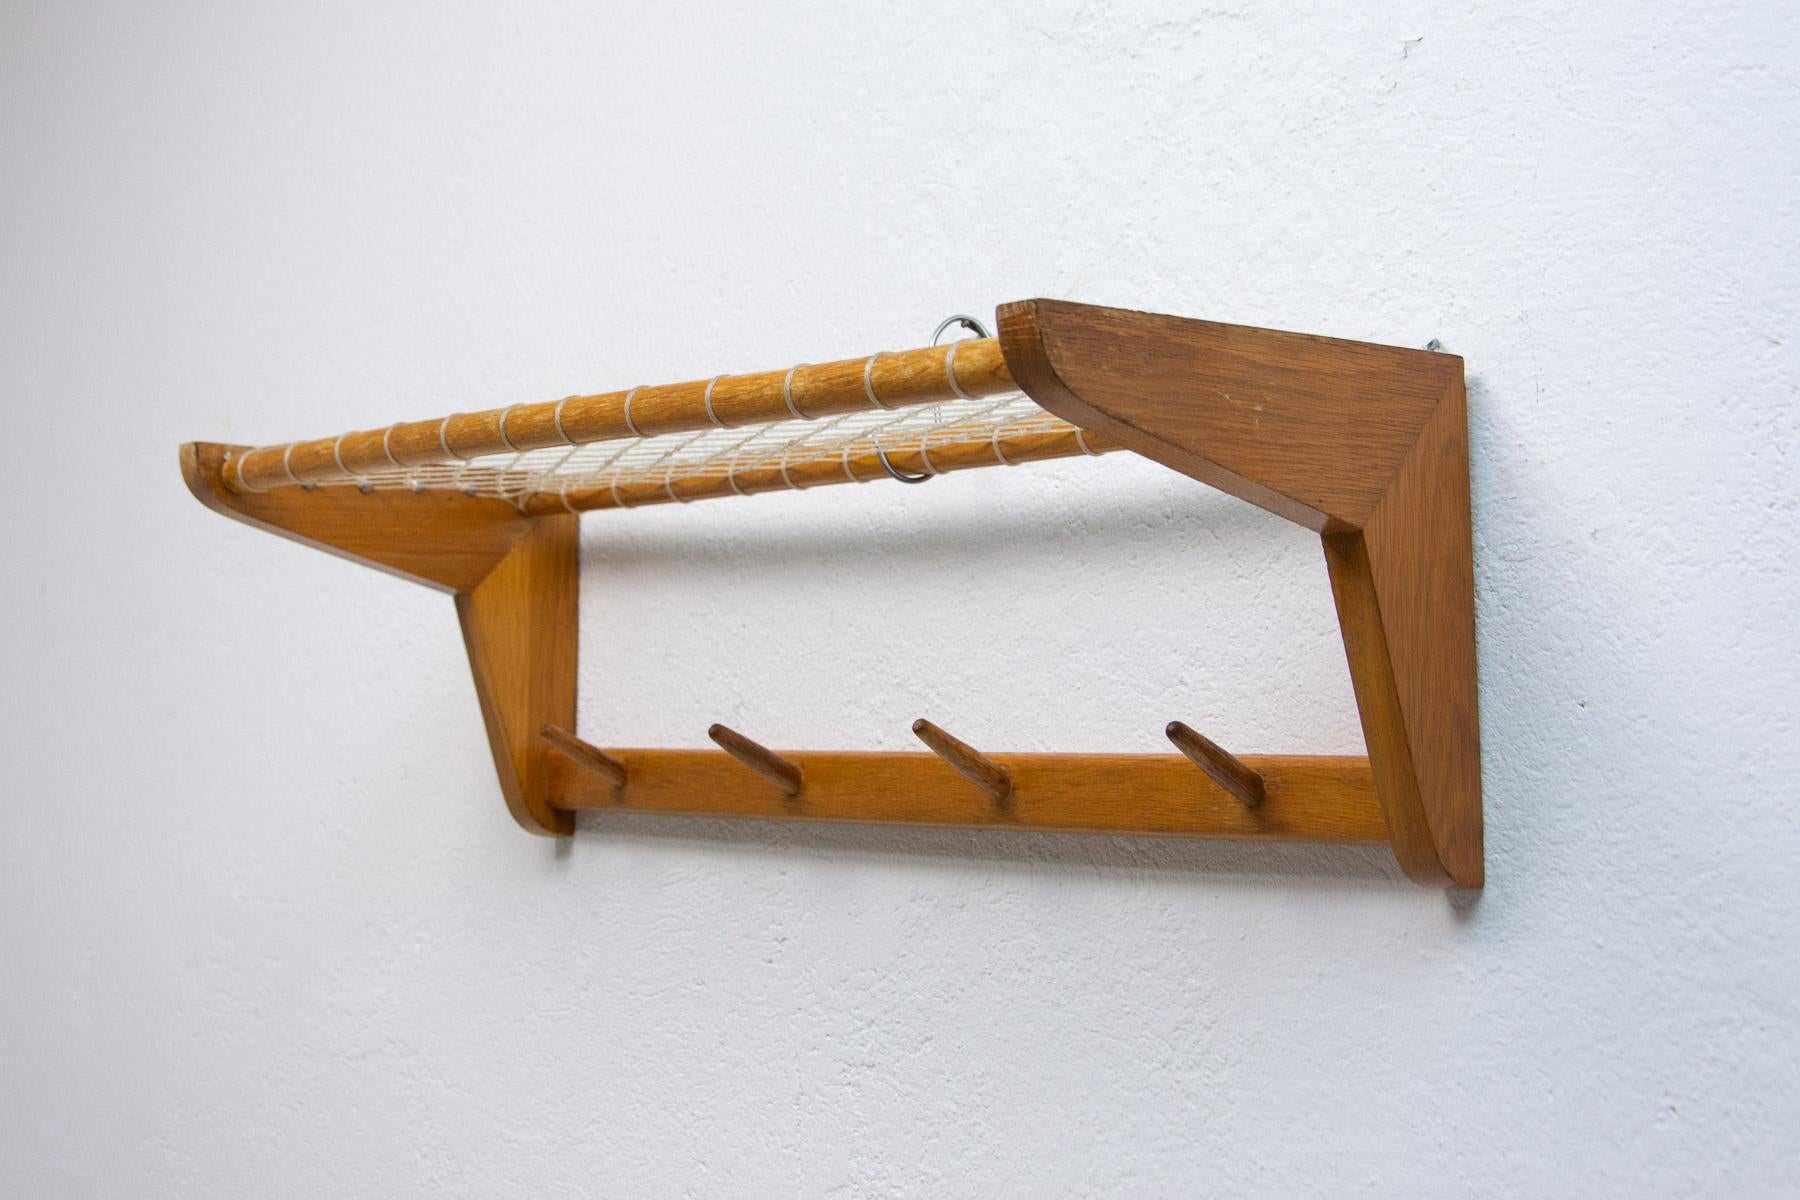 Vintage Wall shelf, made in the former Czechoslovakia in the 1960´s. It was produced by Krásná Jizba company. It’s made of beech wood and an intertwined upper part. In very good Vintage condition.

Measures: Height: 20 cm

Lenght: 60